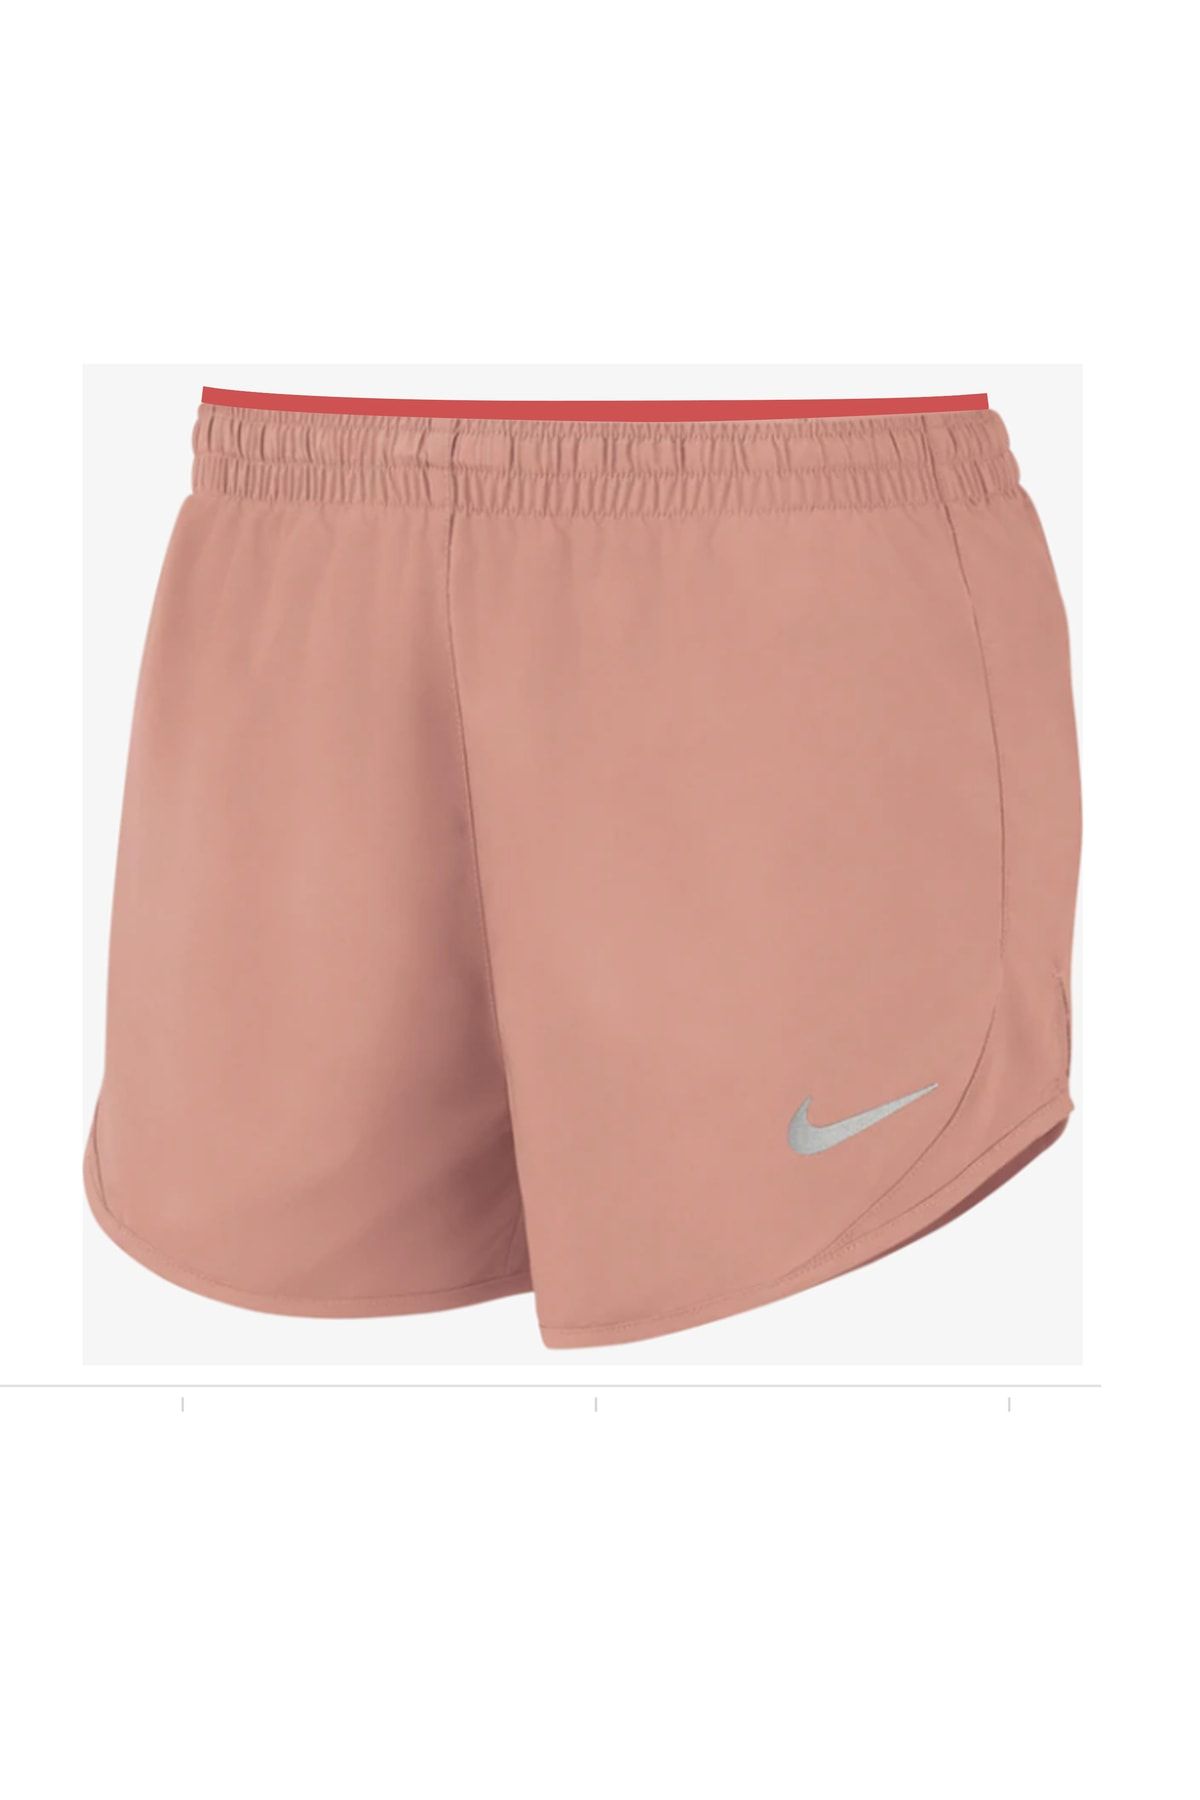 Nike Yorkshire Women's Tempo Lux 5” Shorts